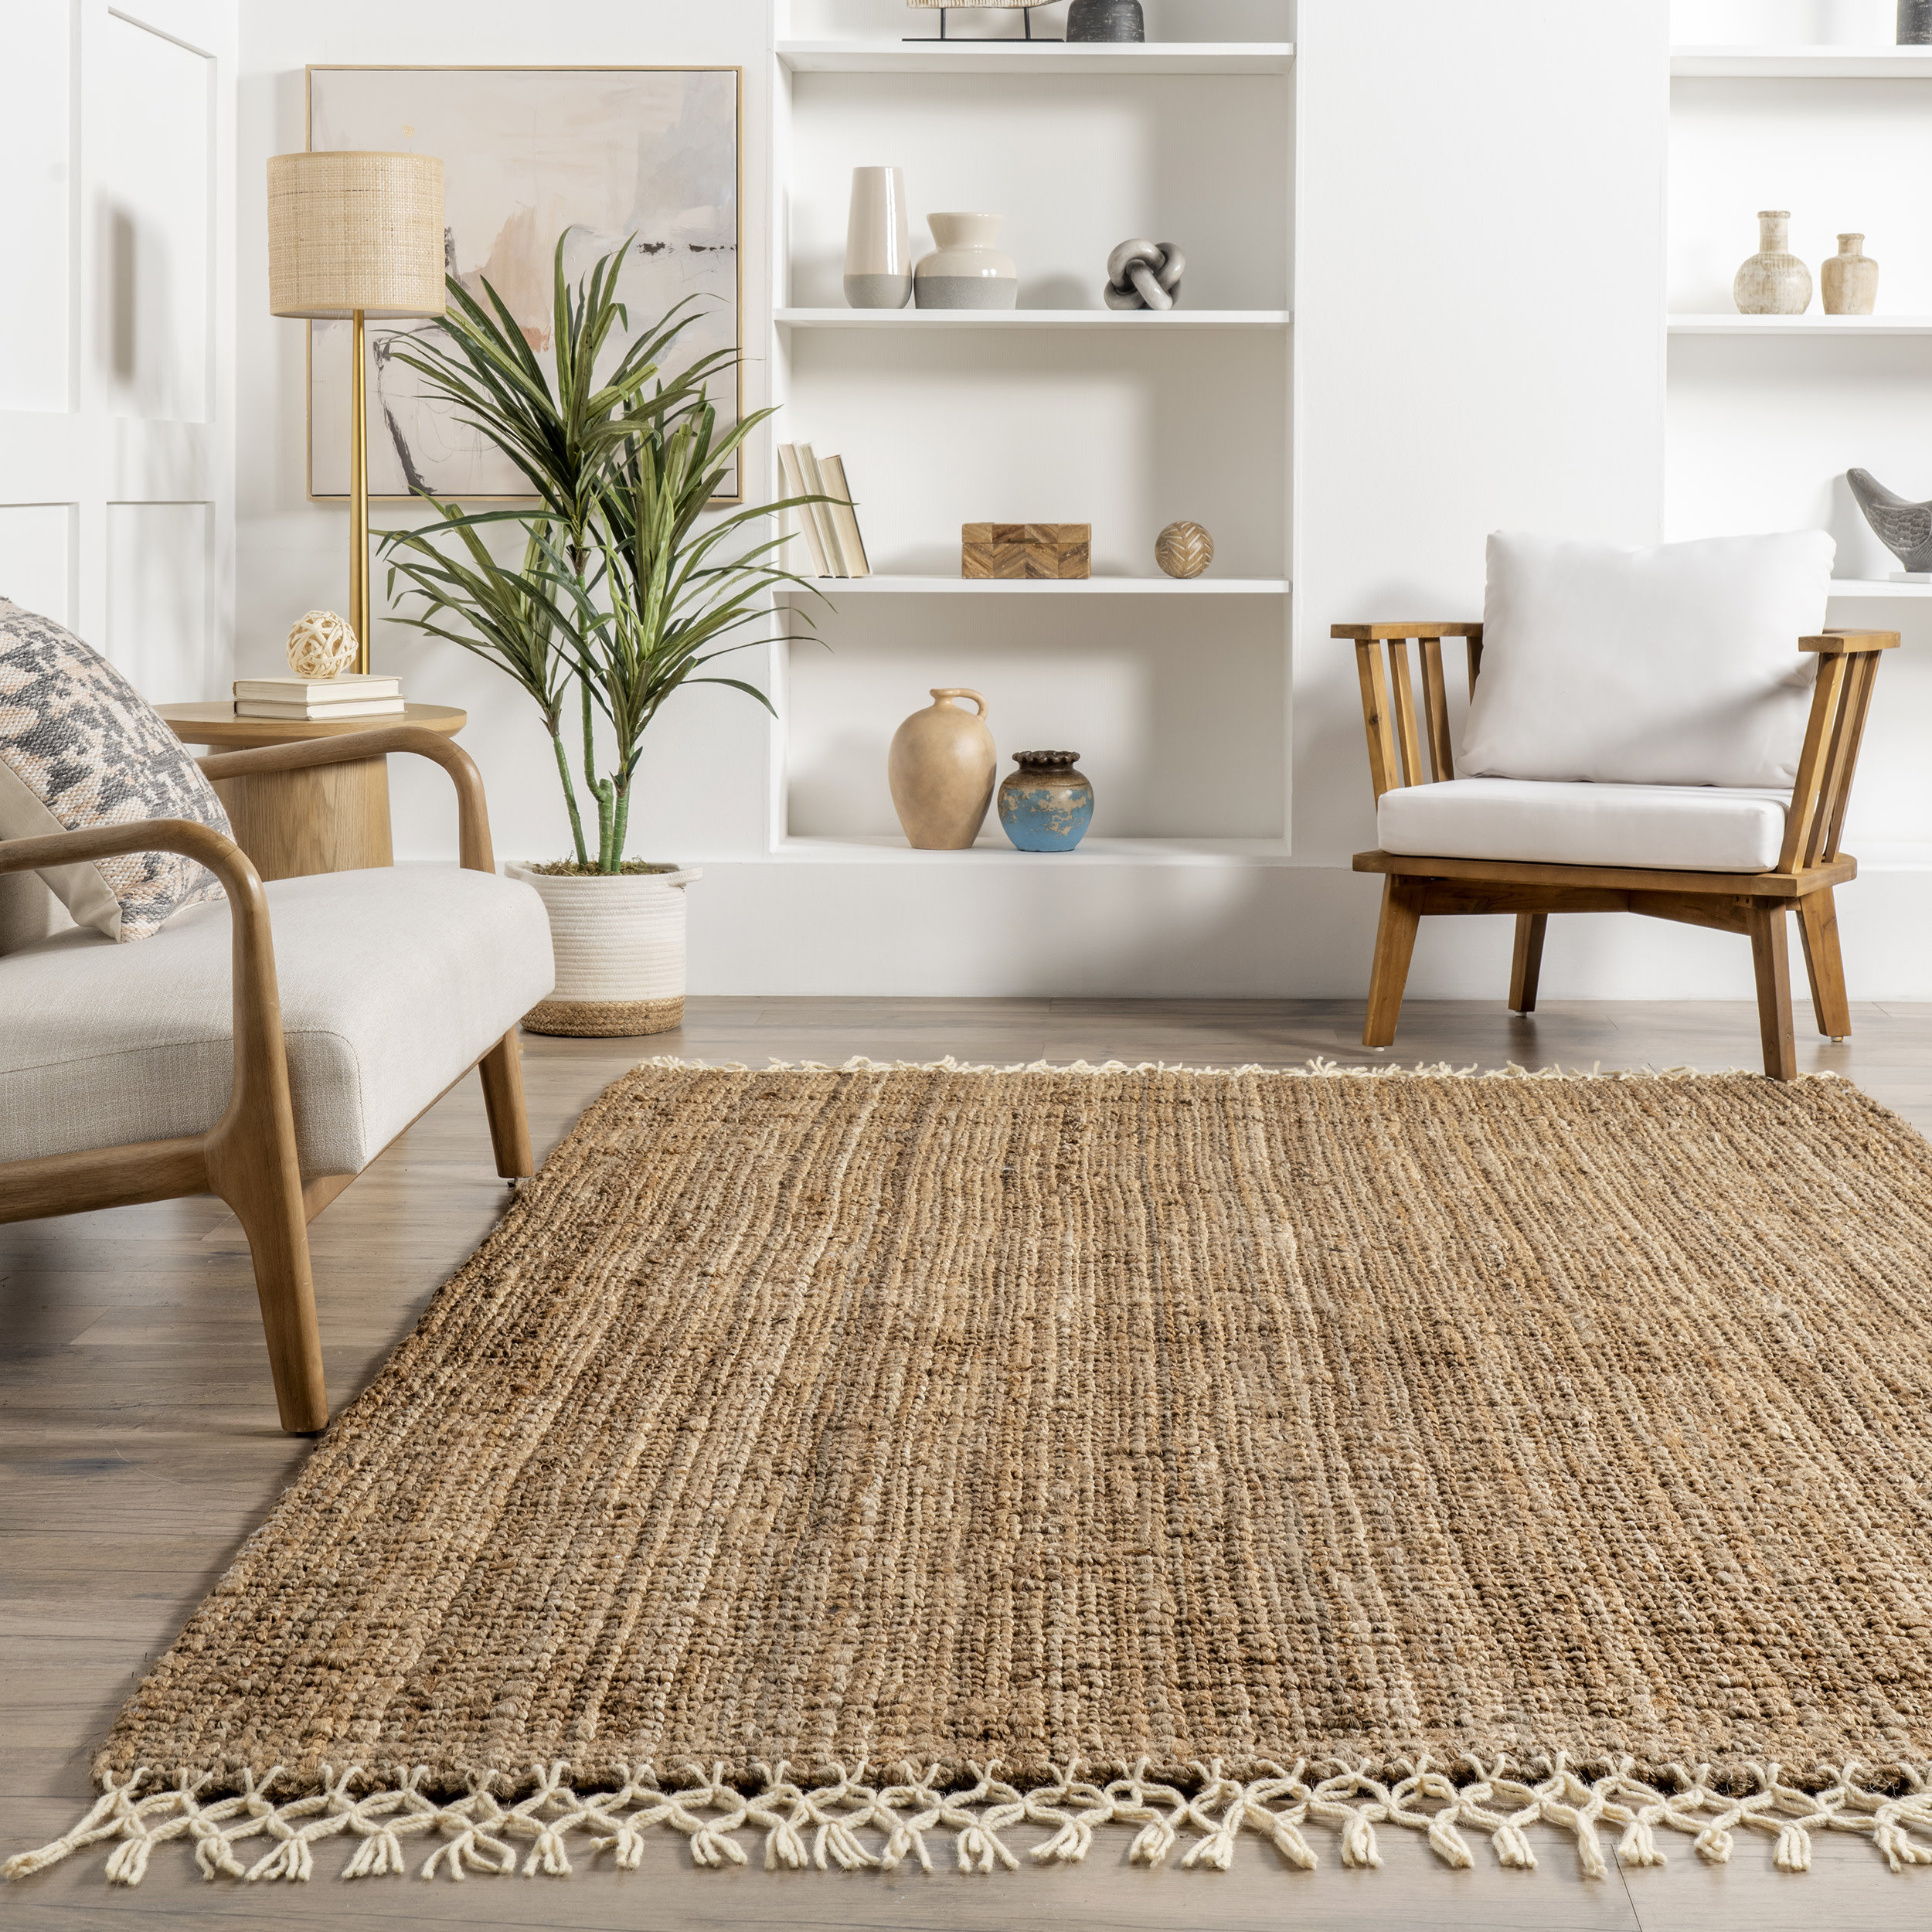 Standard Rug Sizes: The Right Sized Rug for Every Room - Jessica